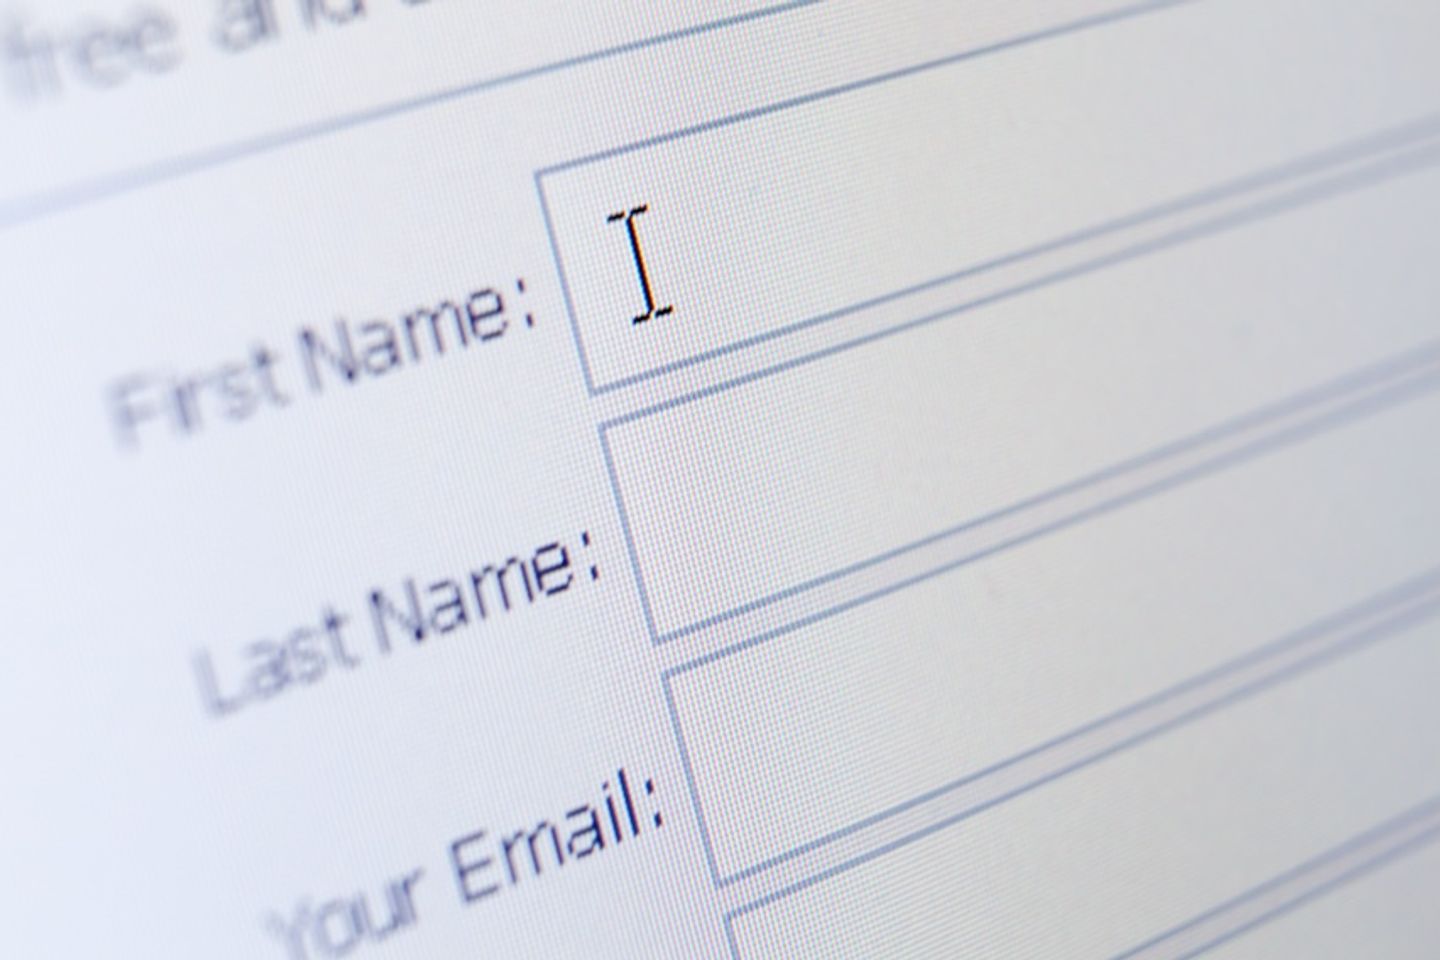 A basic email sign-up form with fields for first and last names as well as email address.